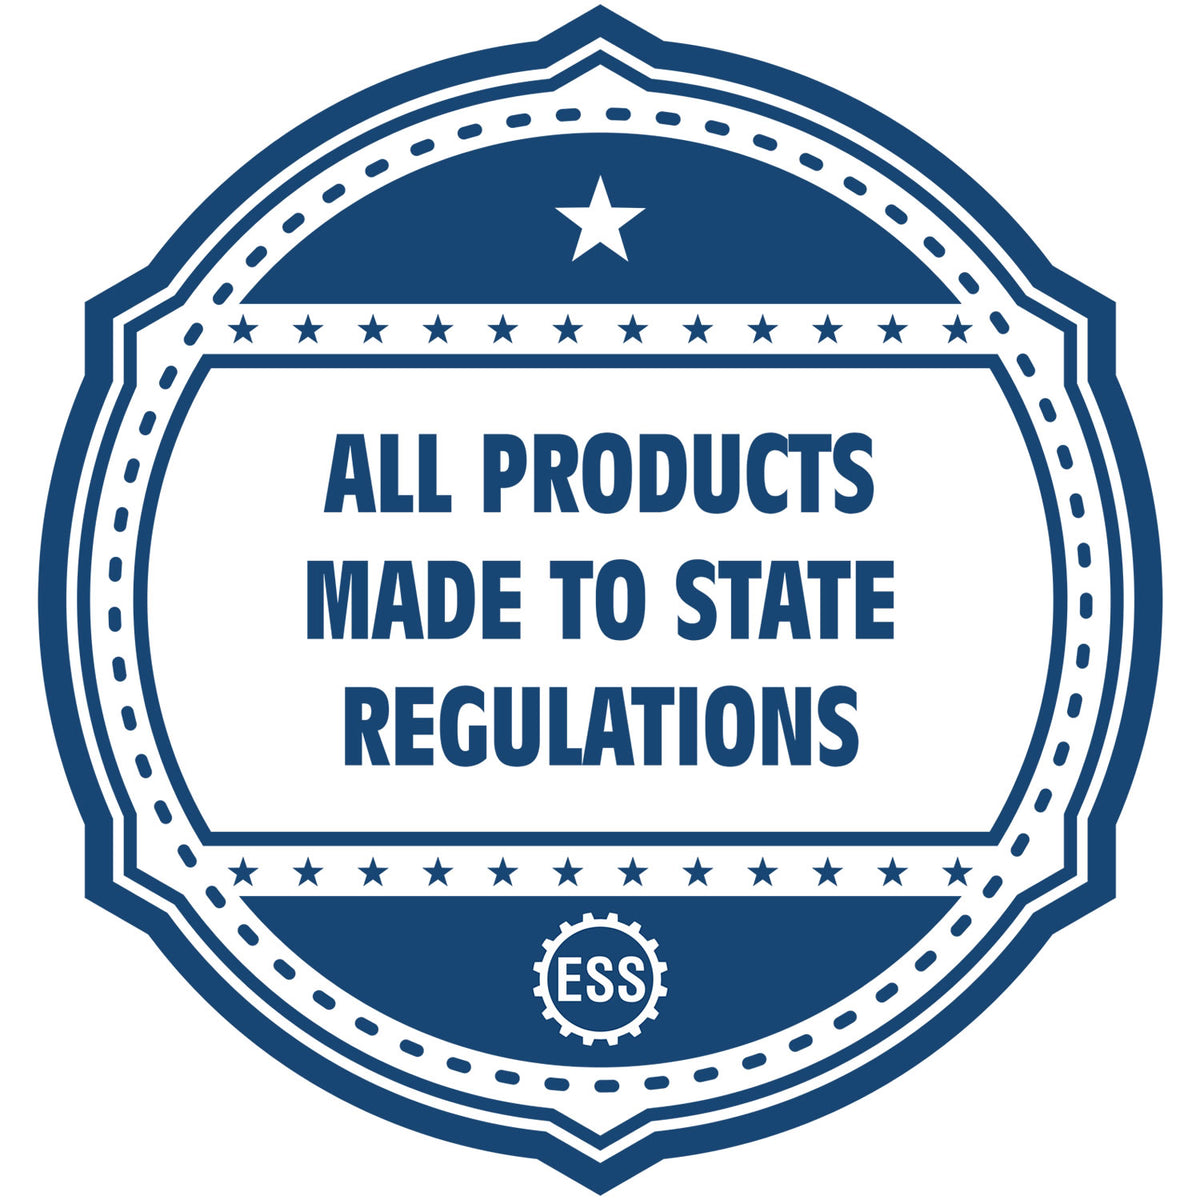 An icon or badge element for the Self-Inking Vermont PE Stamp showing that this product is made in compliance with state regulations.